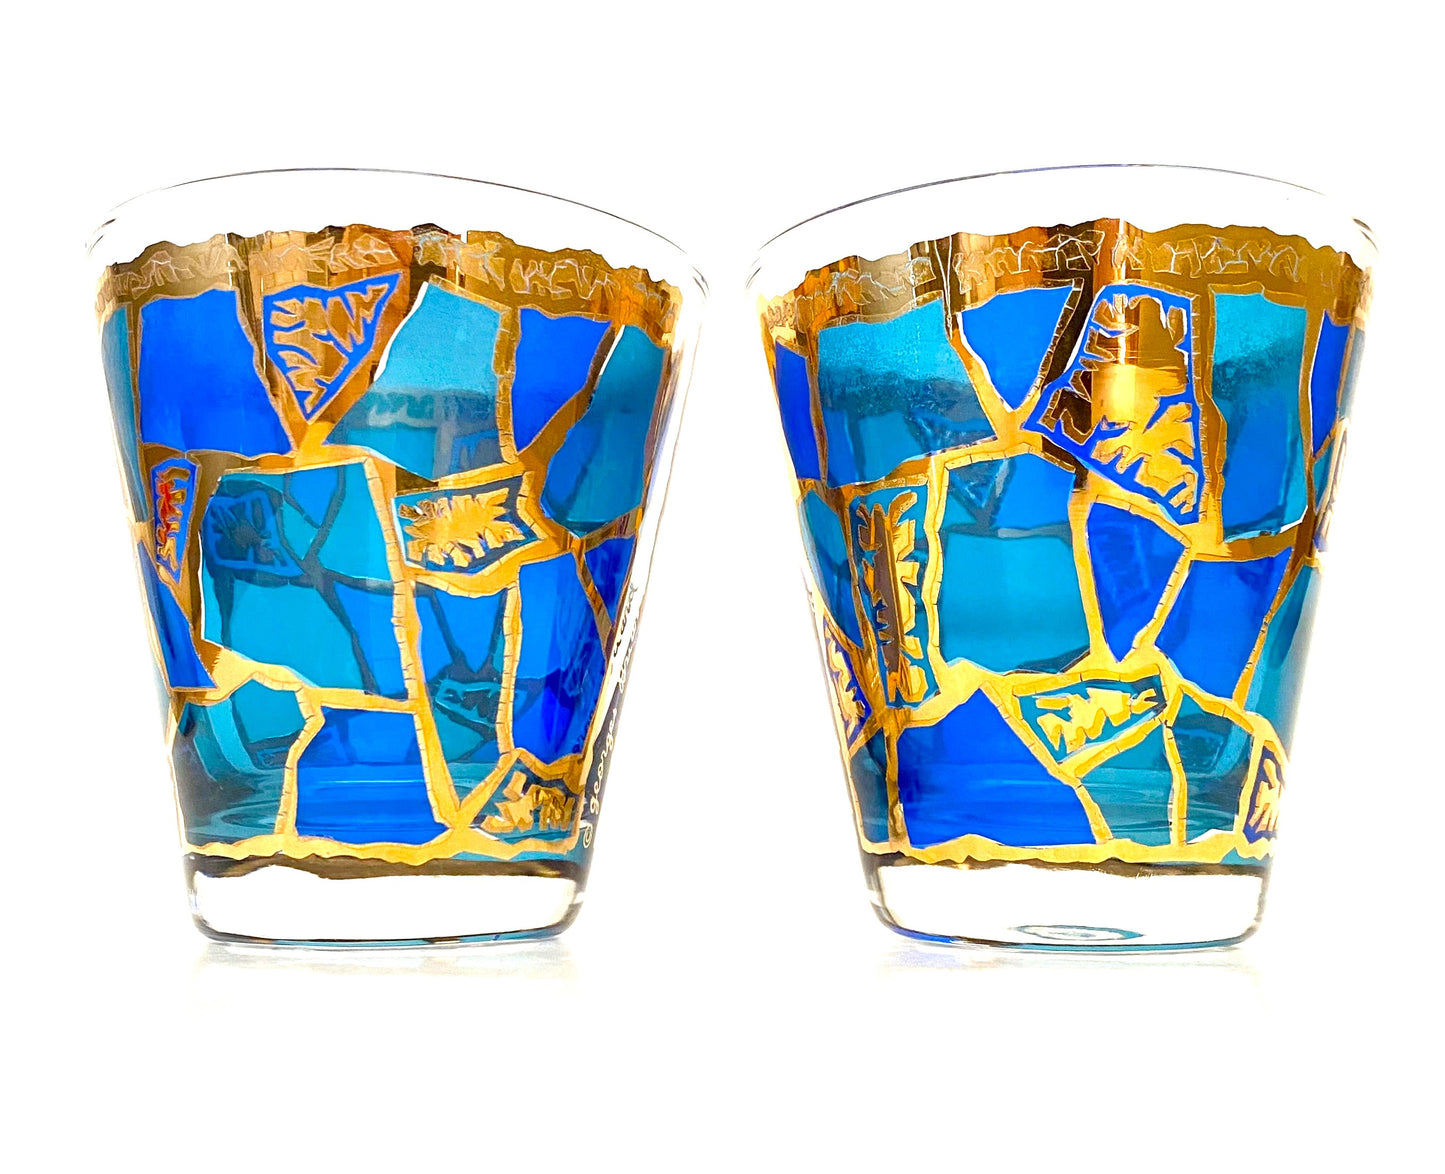 Georges Briard Europa Suburbans/Double Old Fashioned (Pair) 3 Available